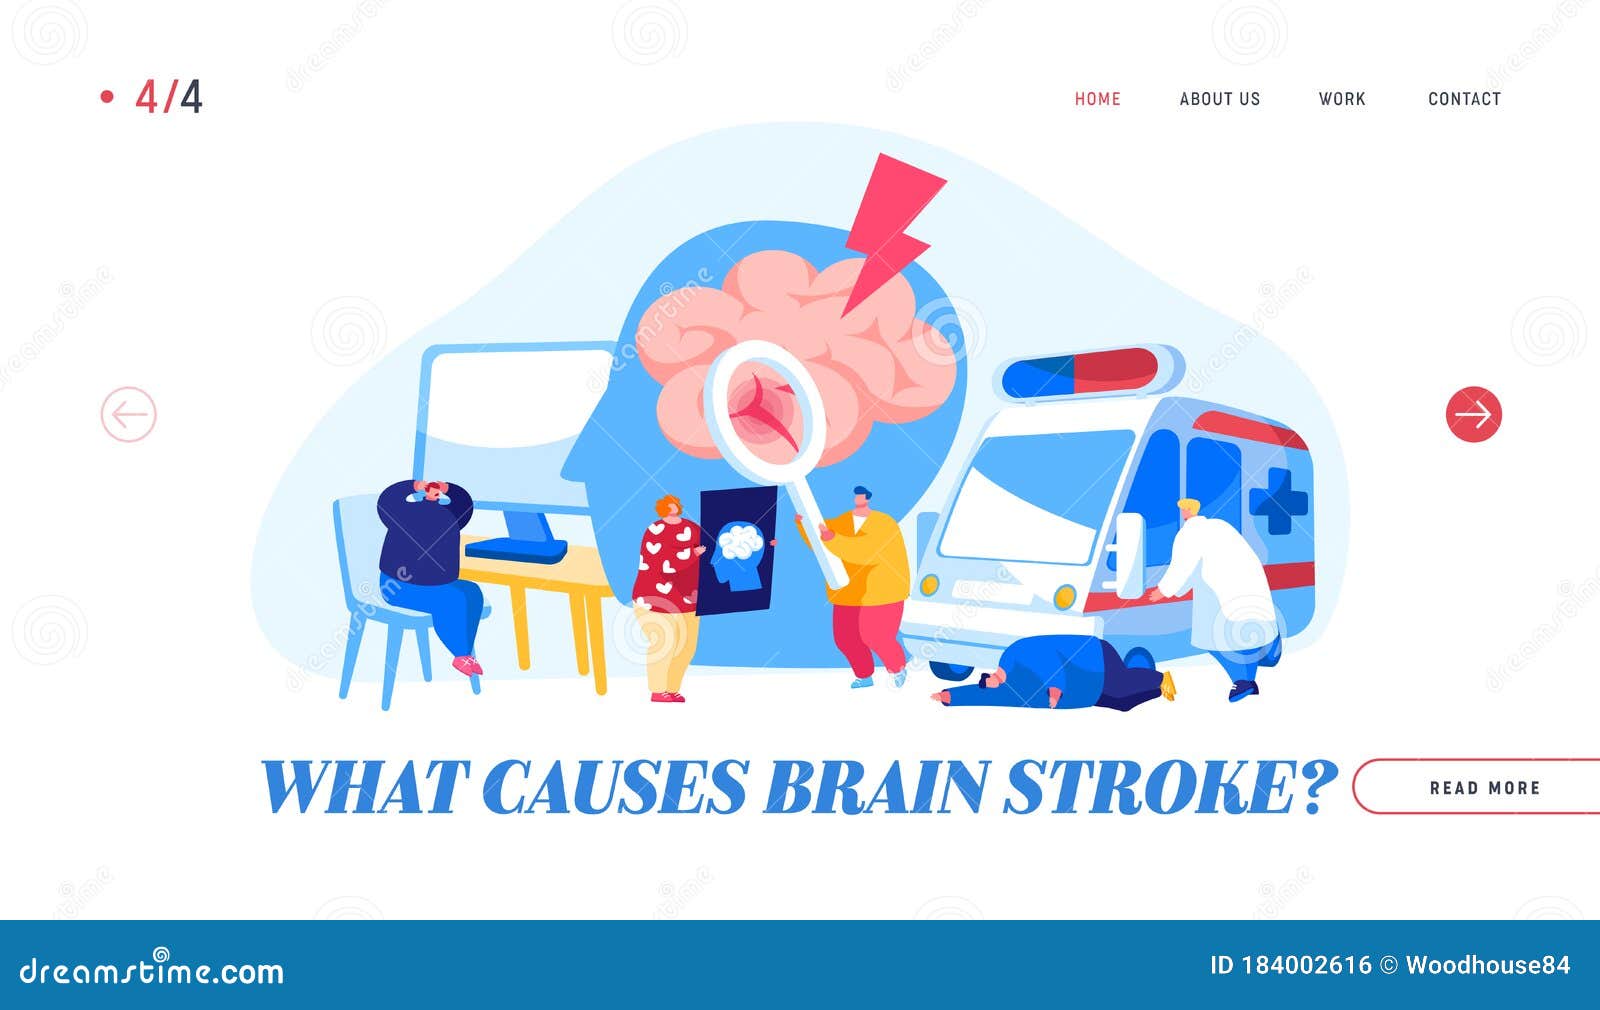 brain stroke, apoplexy, insult attack landing page template. ambulance hospitalize patient character to clinic